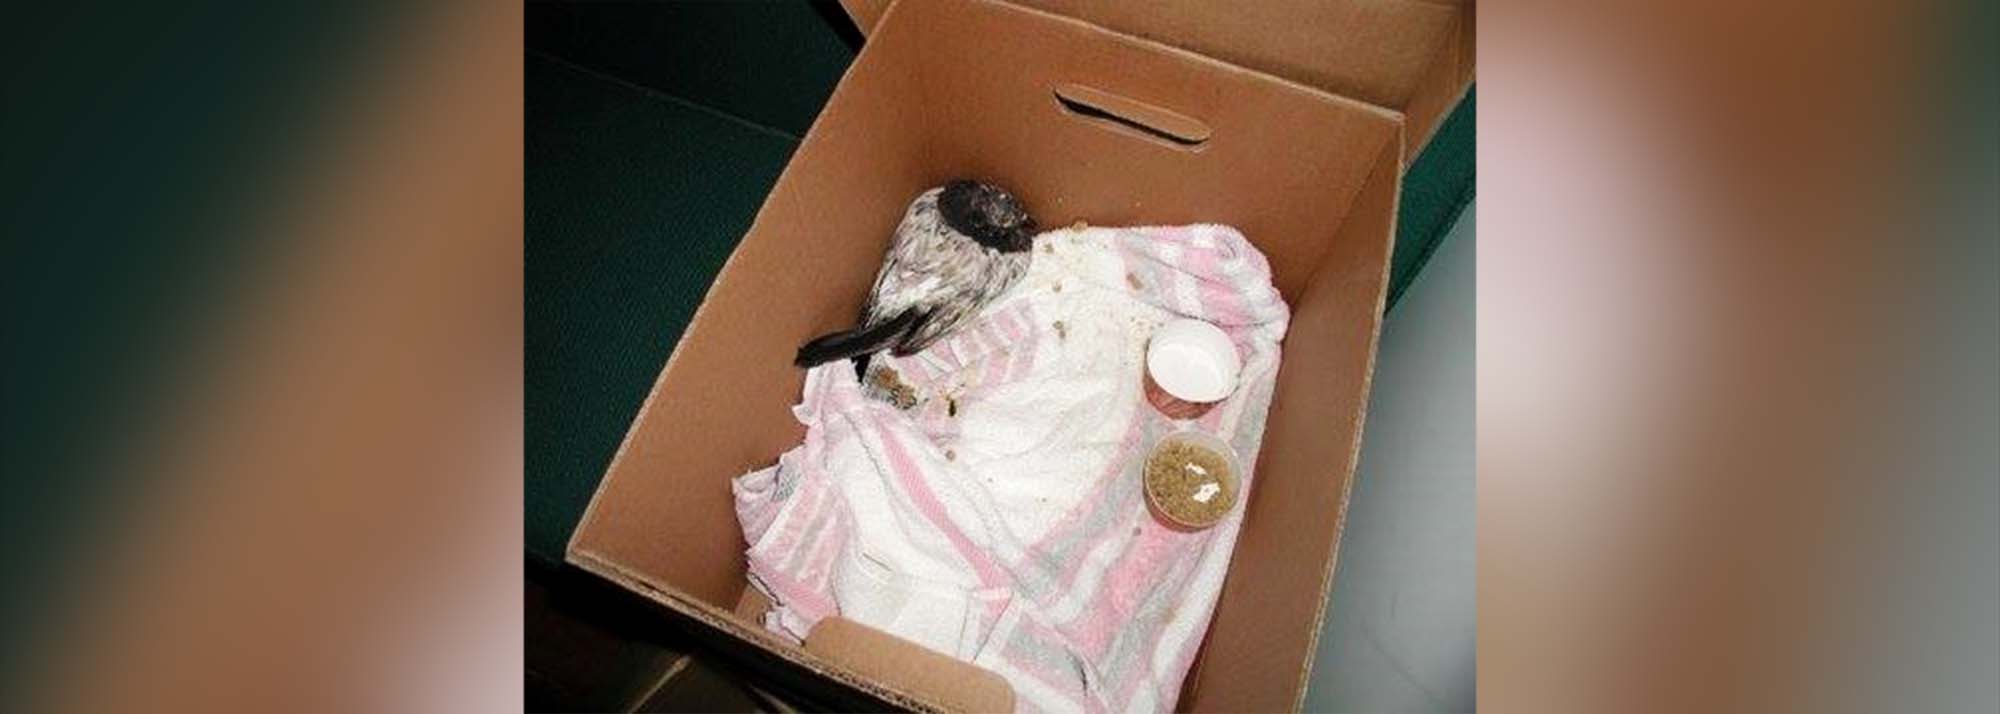 PHOTO:  Dr. John Charos said this pigeon was the only live thing he saw come from the rubble at Ground Zero.